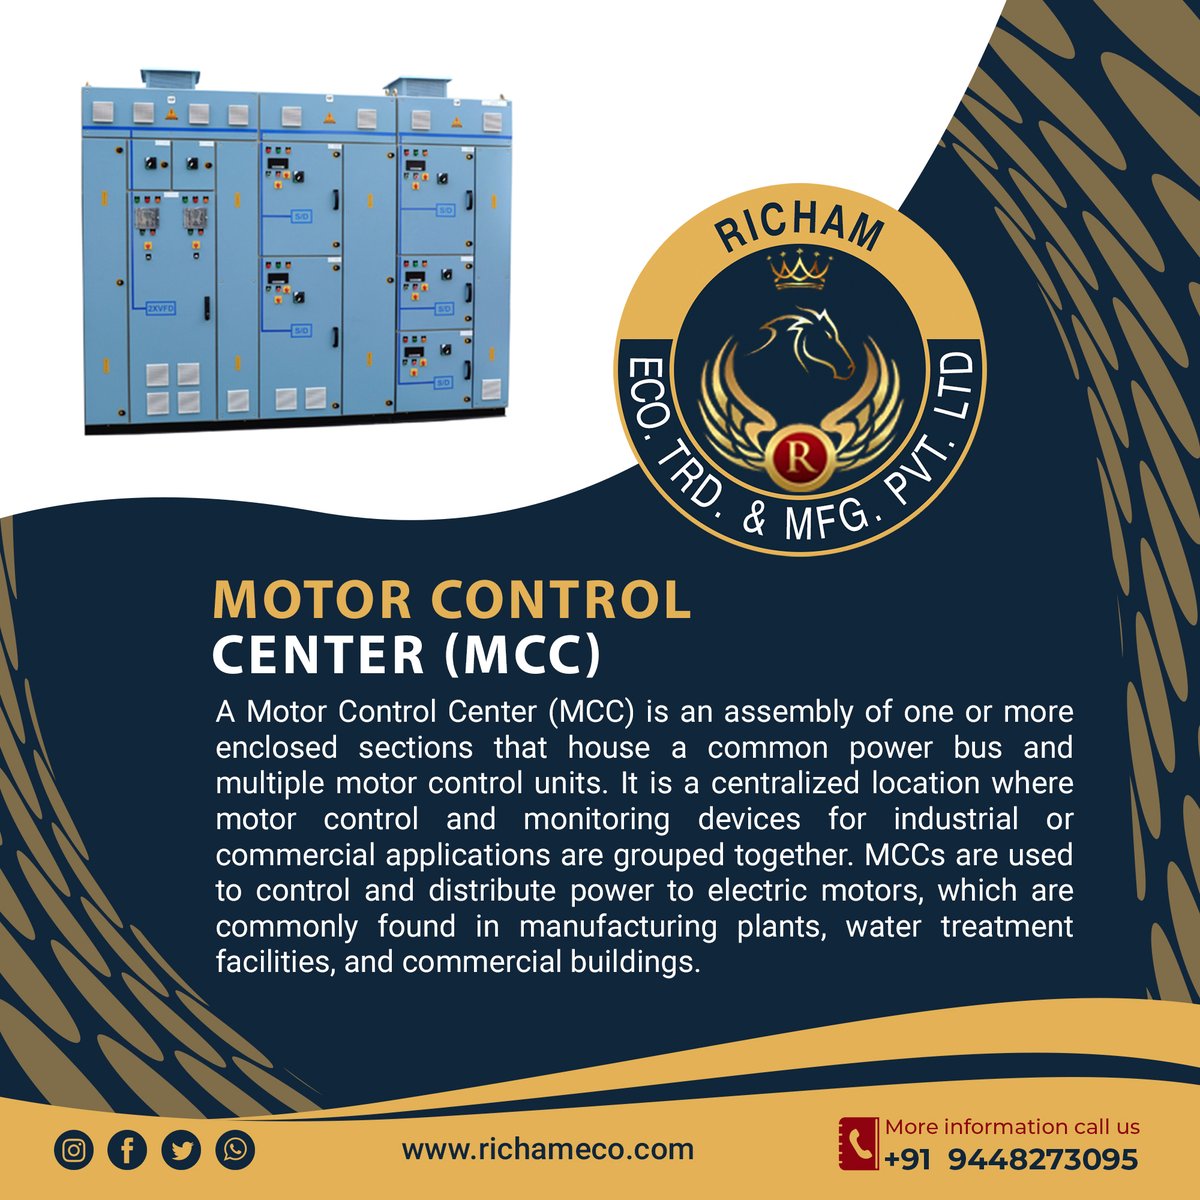 #MCC #MotorControlCenter
#IndustrialAutomation #ElectricalEngineering #PowerDistribution
#PLC #VariableFrequencyDrive
#ElectricMotors #ControlPanel
#ManufacturingPlant #Refinery
#WaterTreatmentPlant
#EnergyEfficiency
#DowntimeReduction
#ElectricalSafety
#EngineeringDesign